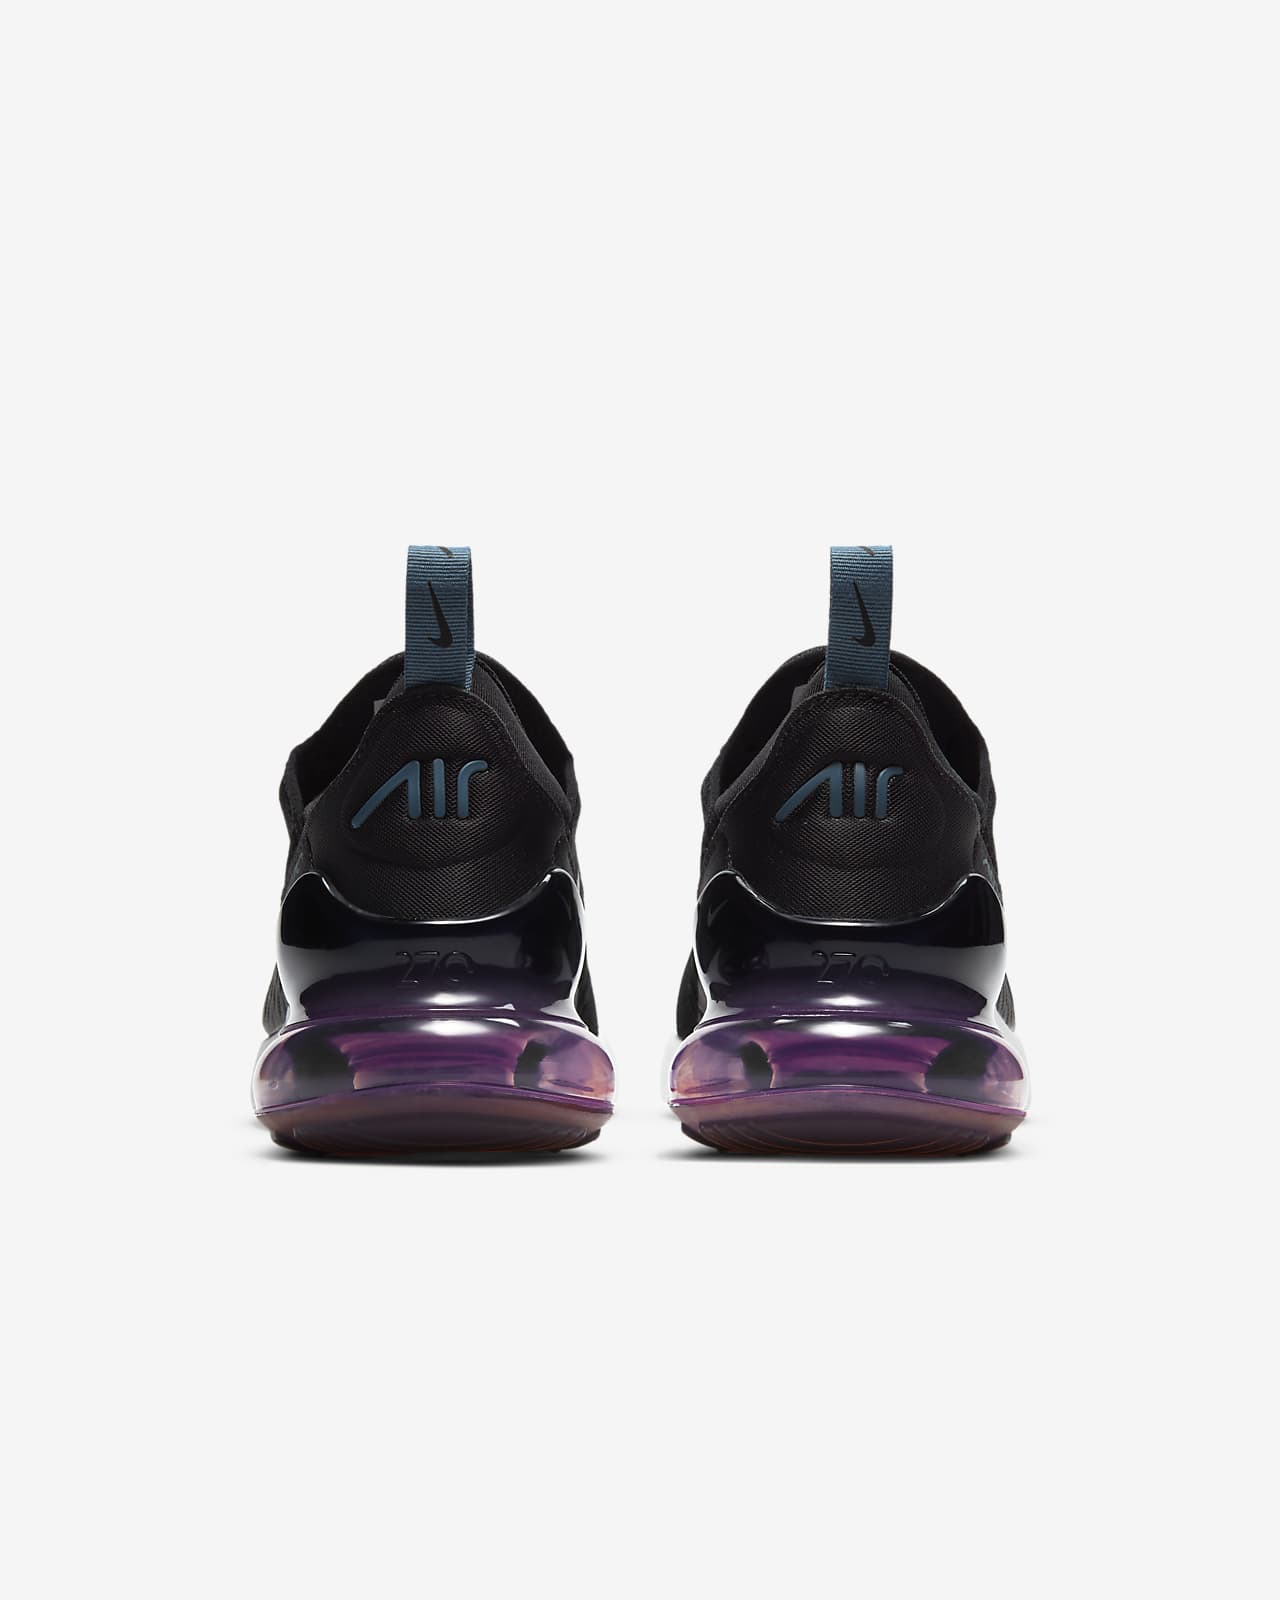 Communism Them chapter nike air max 270 viola Frown celebration Grudge